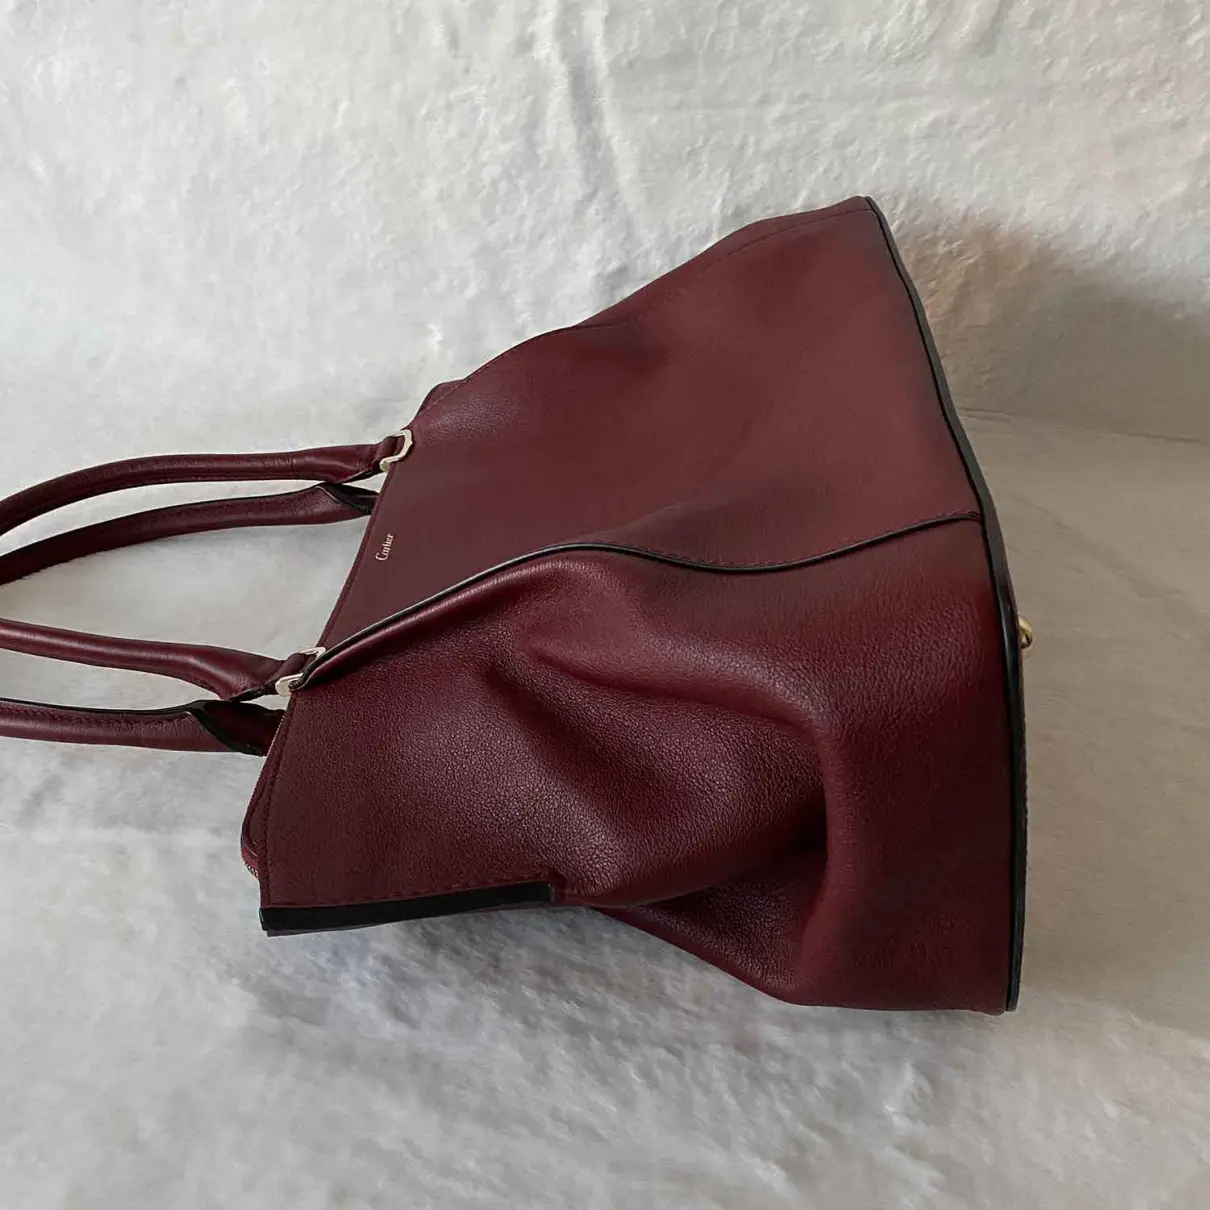 C leather tote Cartier